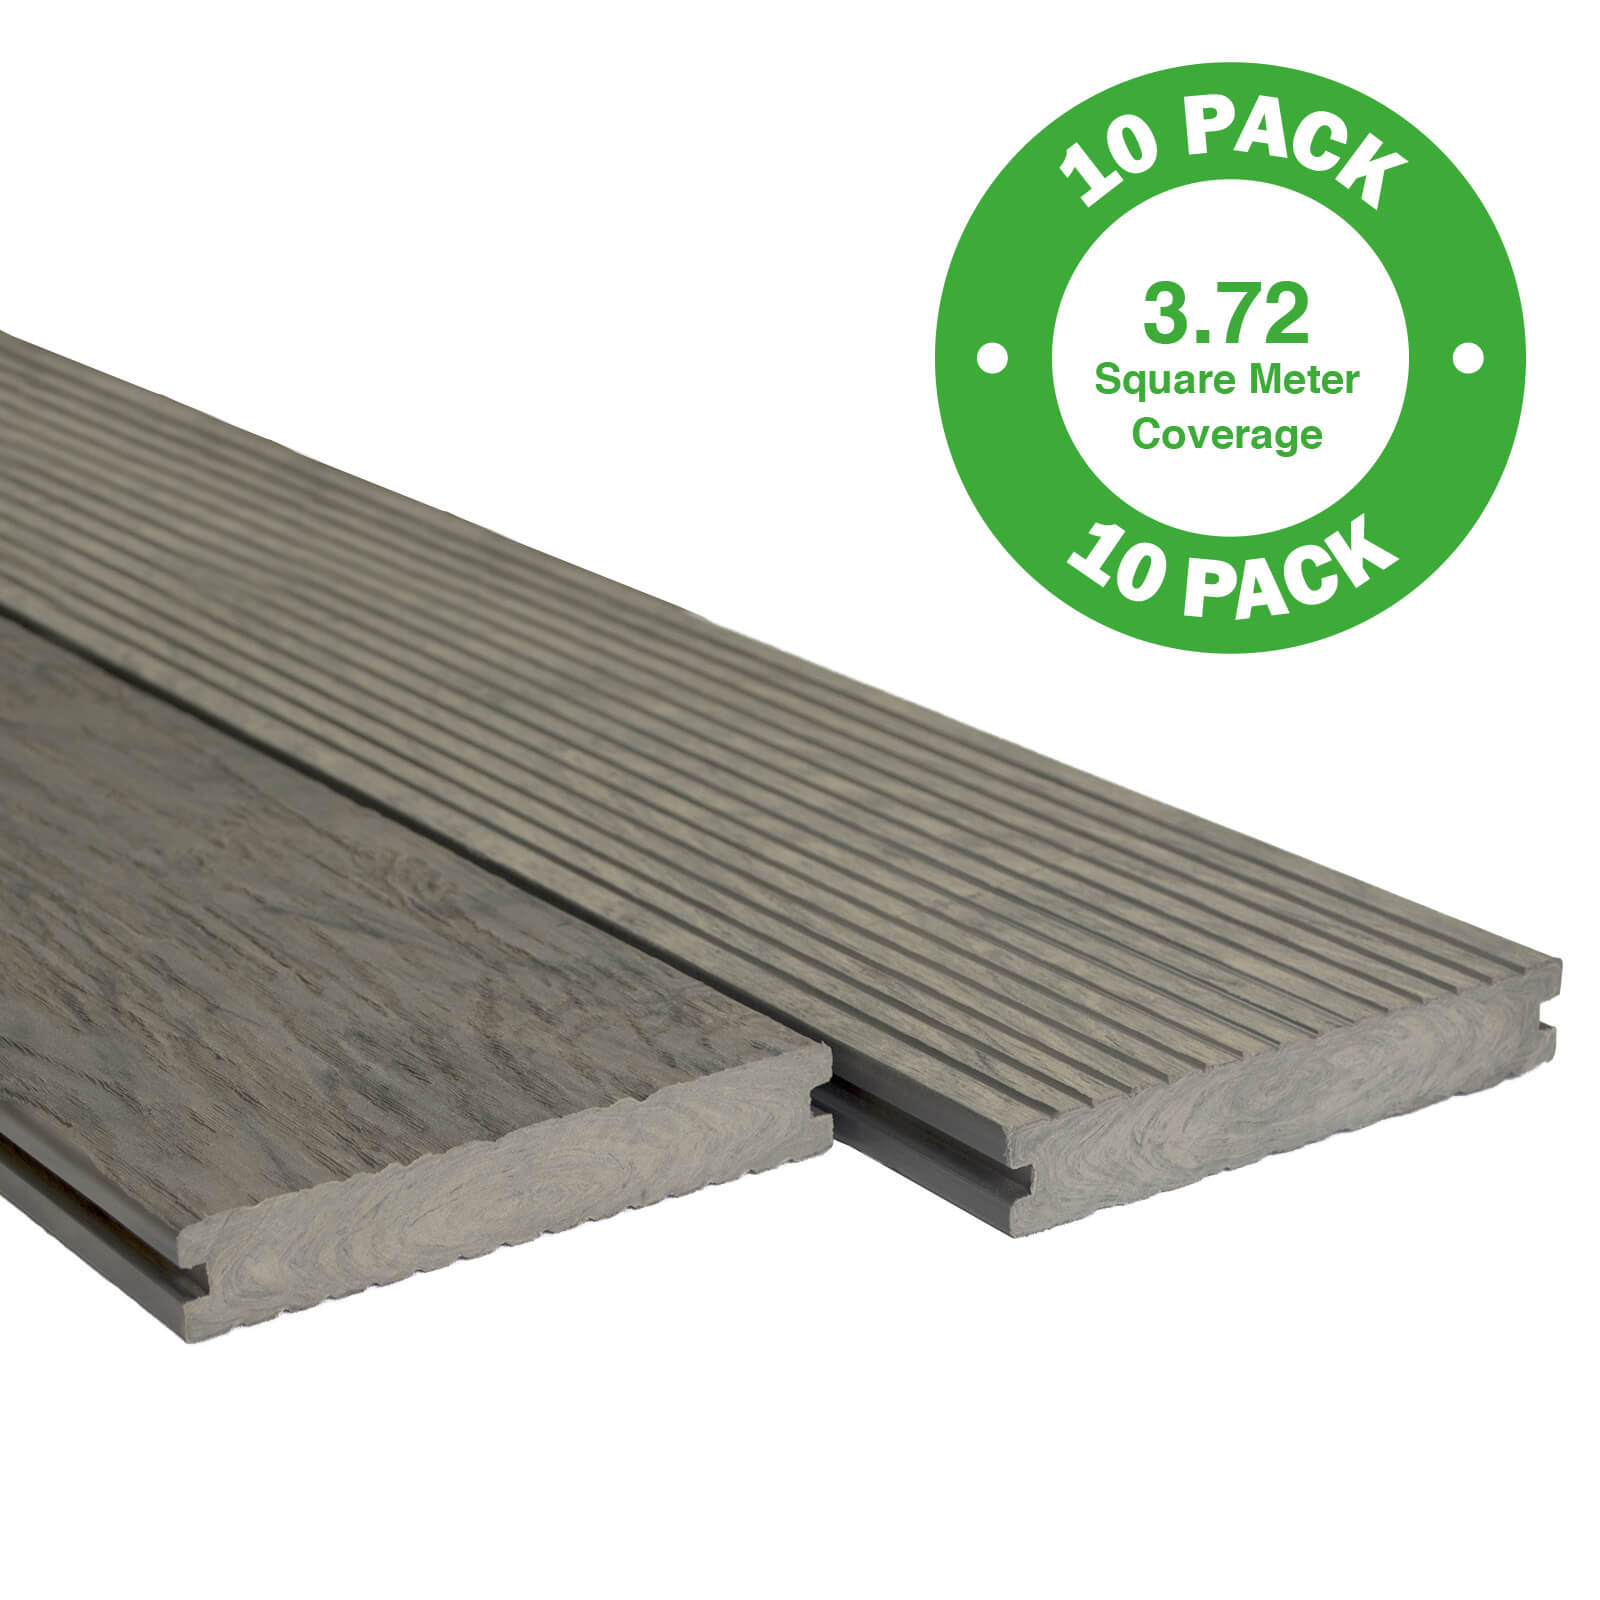 Photo of Heritage Composite Decking 10 Pack Driftwood - 3.72 M2